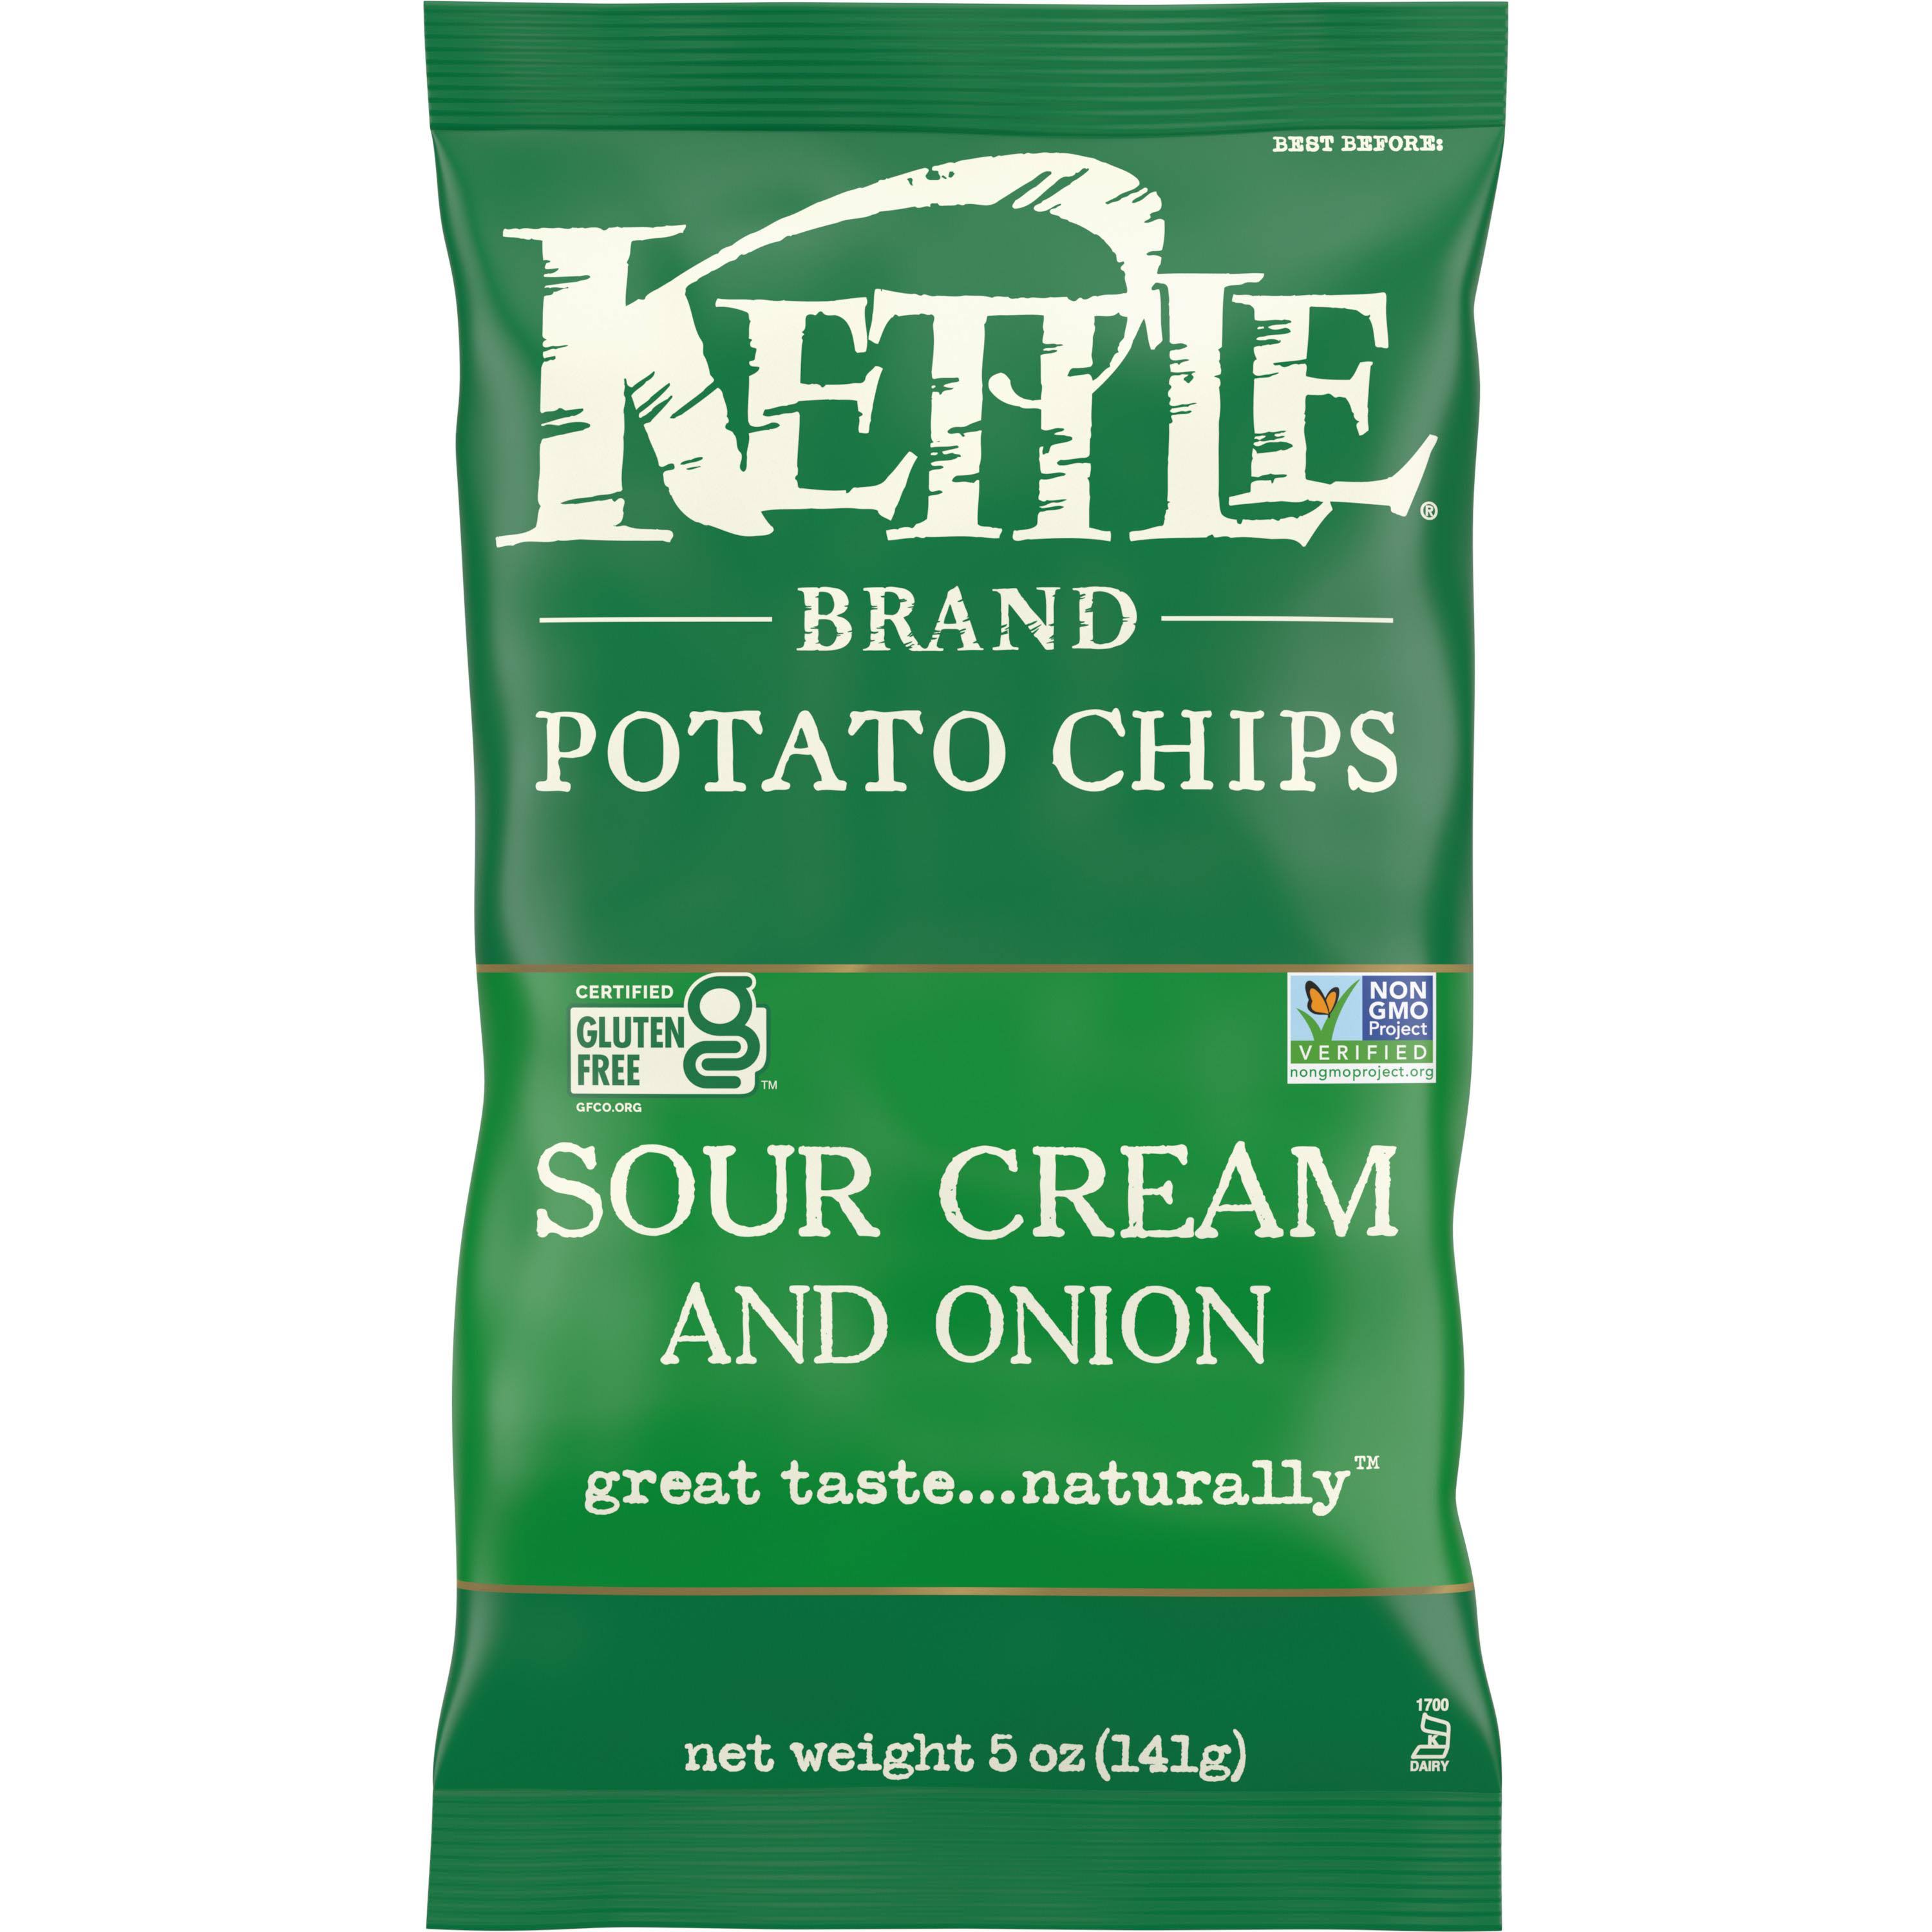 Kettle Brand Potato Chips - Sour Cream and Onion, 142g